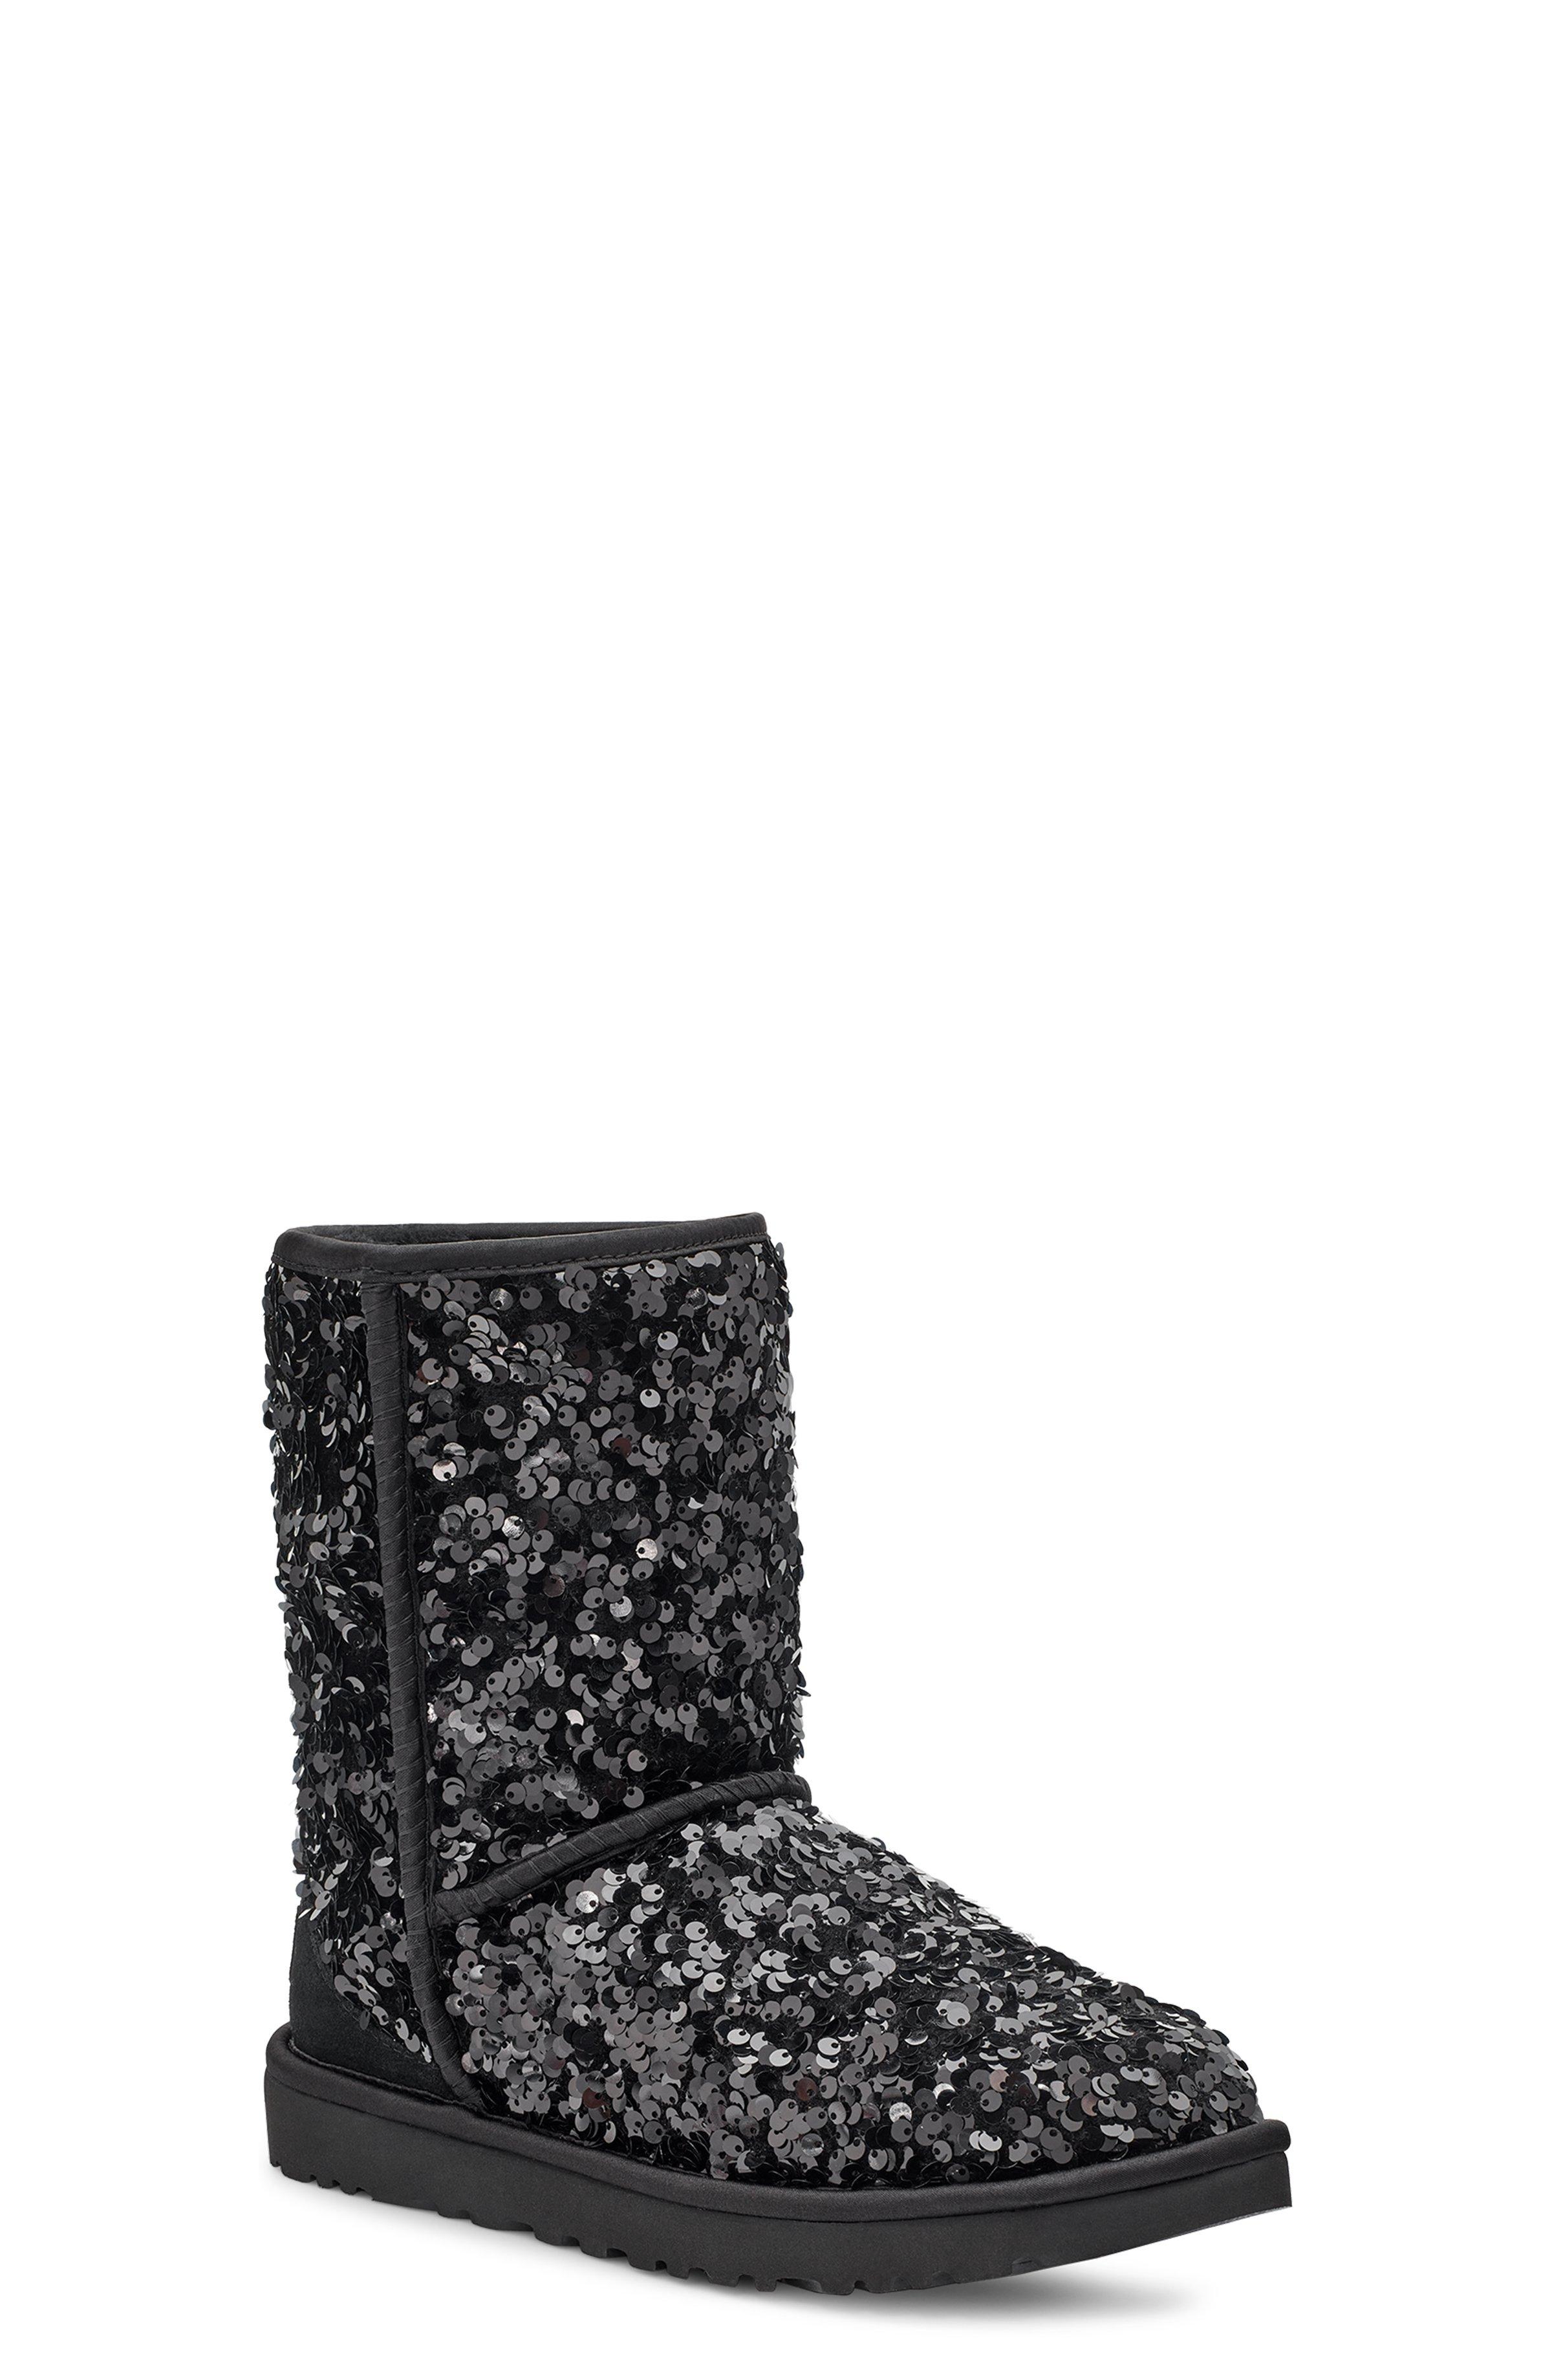 UGG, Shoes, Ugg New Black Classic Short Chunky Sequin Boots Youth 6 Or  Womens Size 8